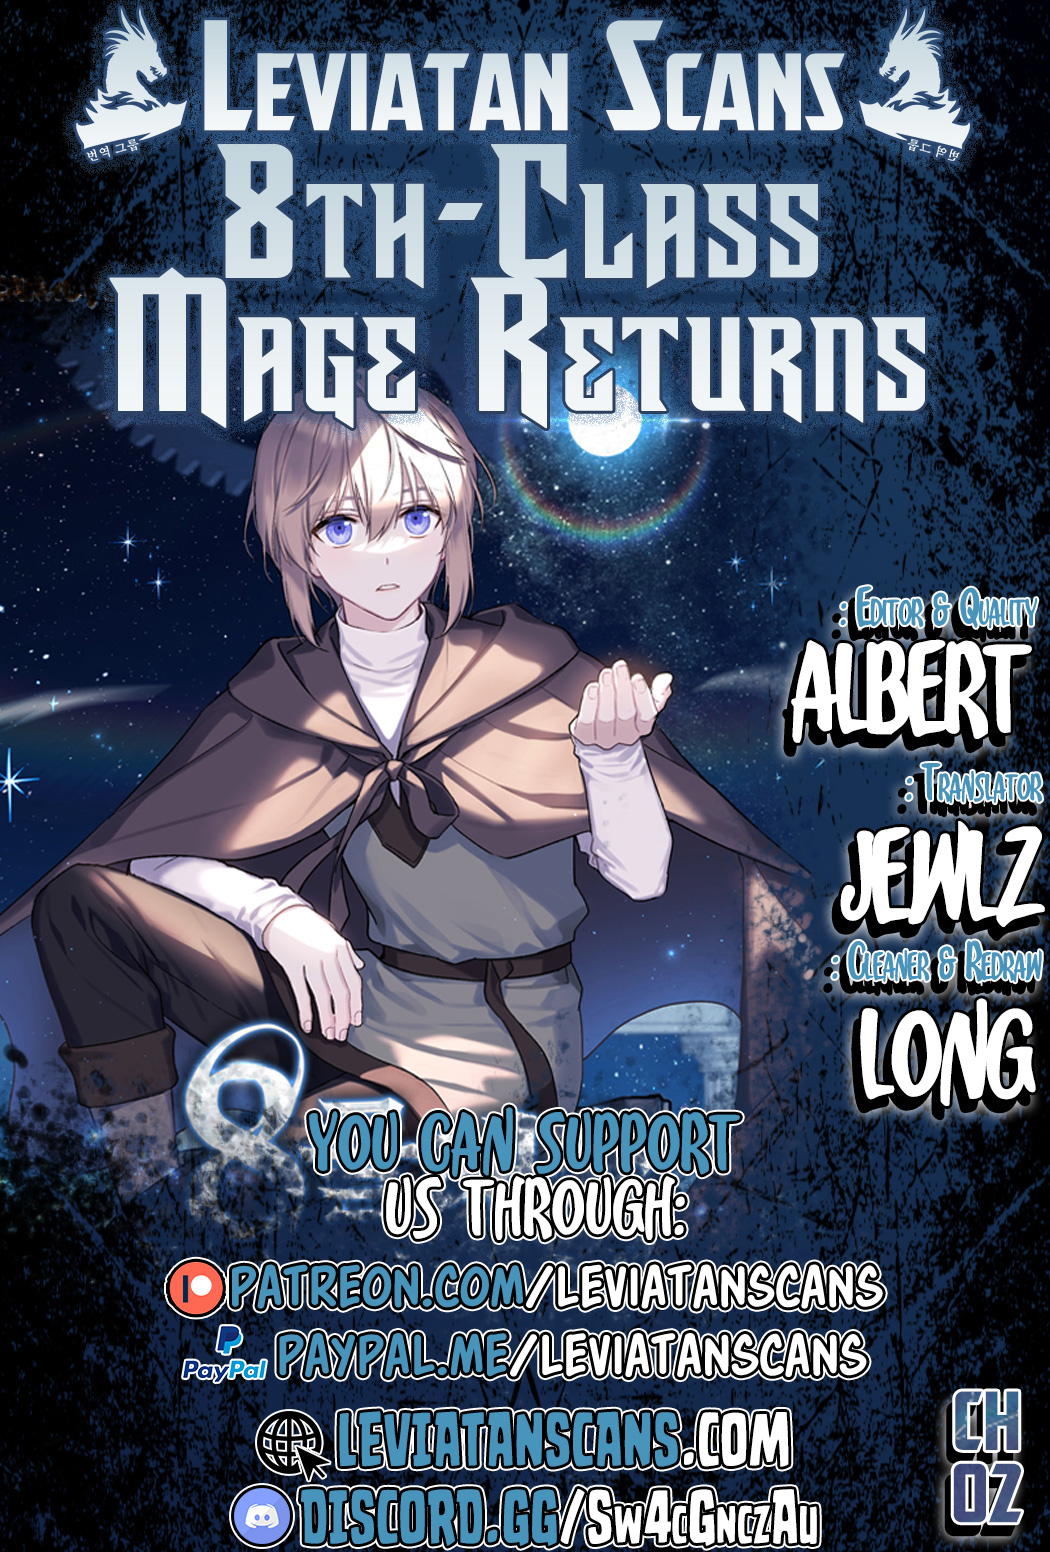 Return of the 8th Class Magician - Chapter 7121 - Image 1